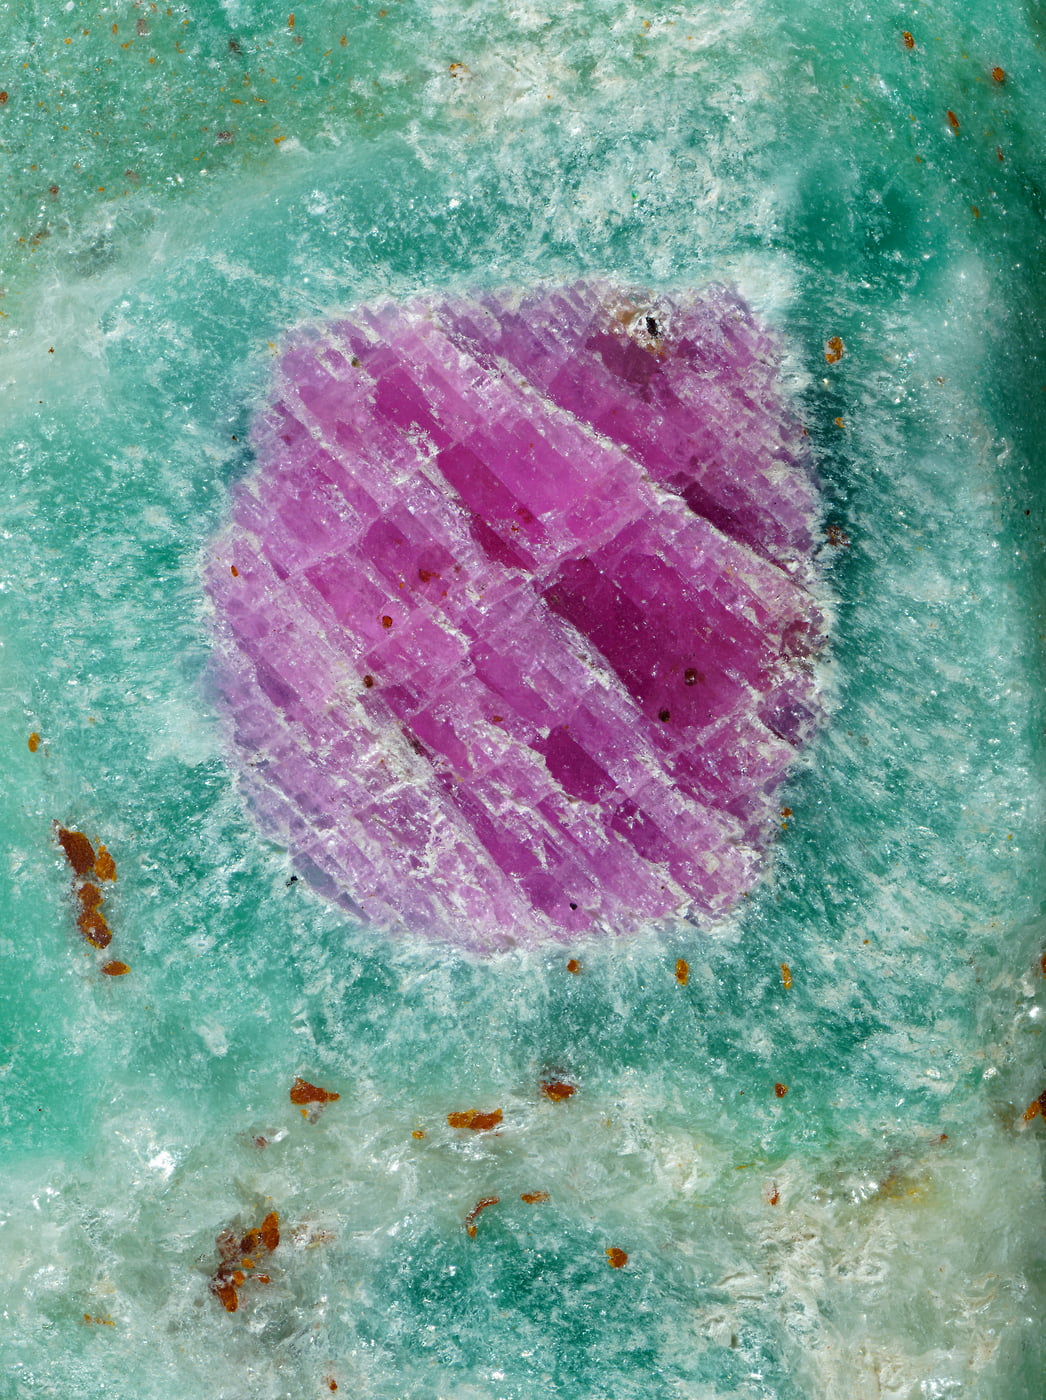 424 megapixels! A very high resolution photo of a gemstone; VAST photo and fine art print created by Steph Mantis